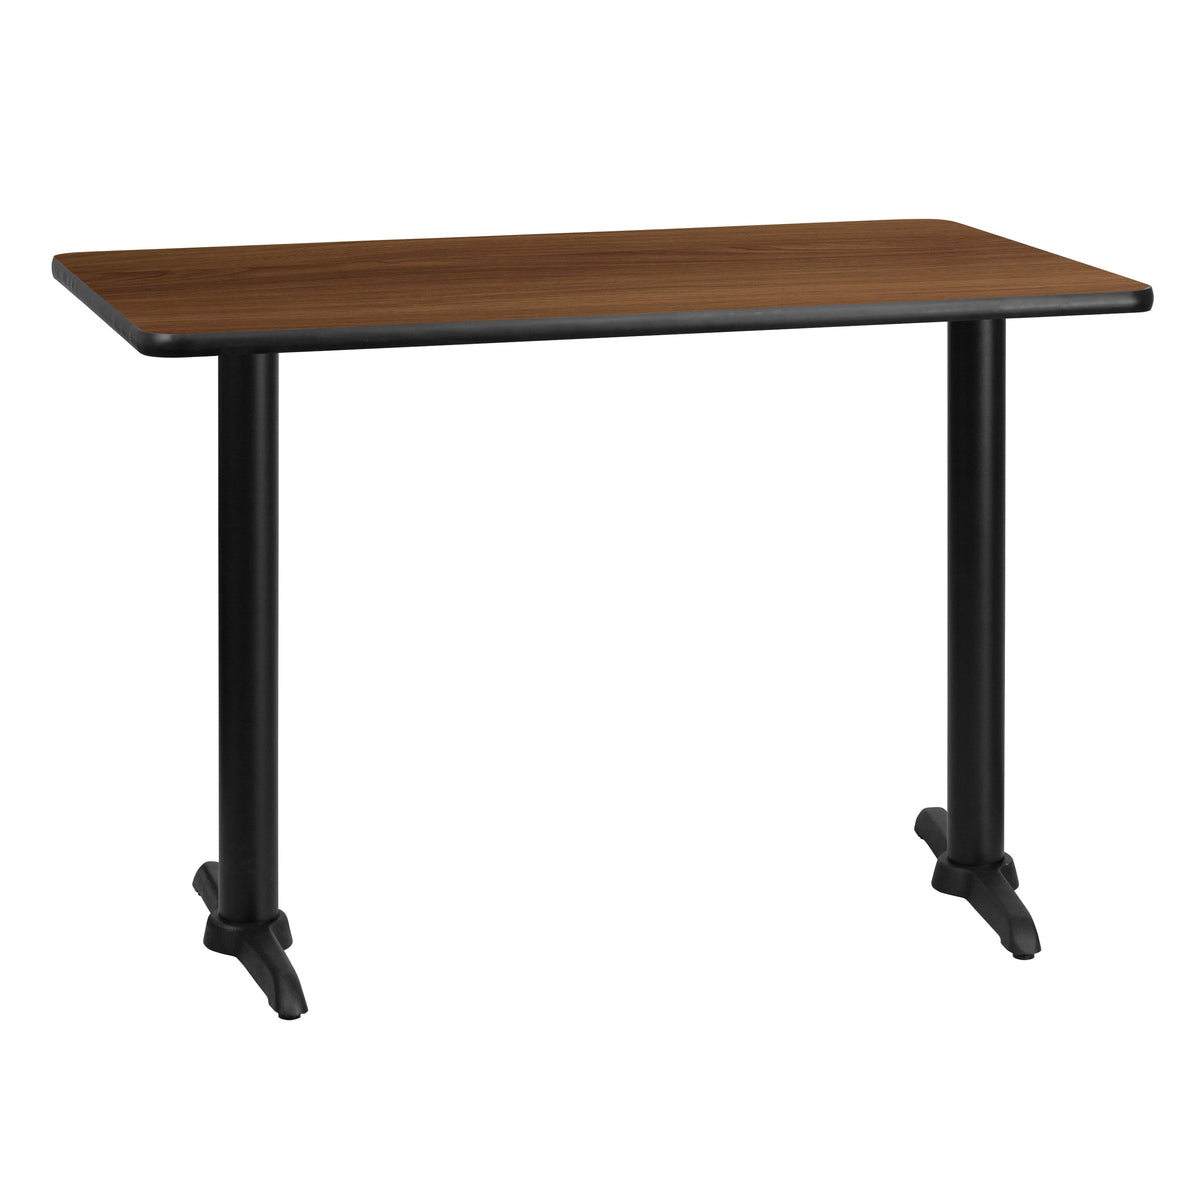 Walnut |#| 30inch x 42inch Rectangular Walnut Laminate Table Top & 5inch x 22inch Table Height Bases